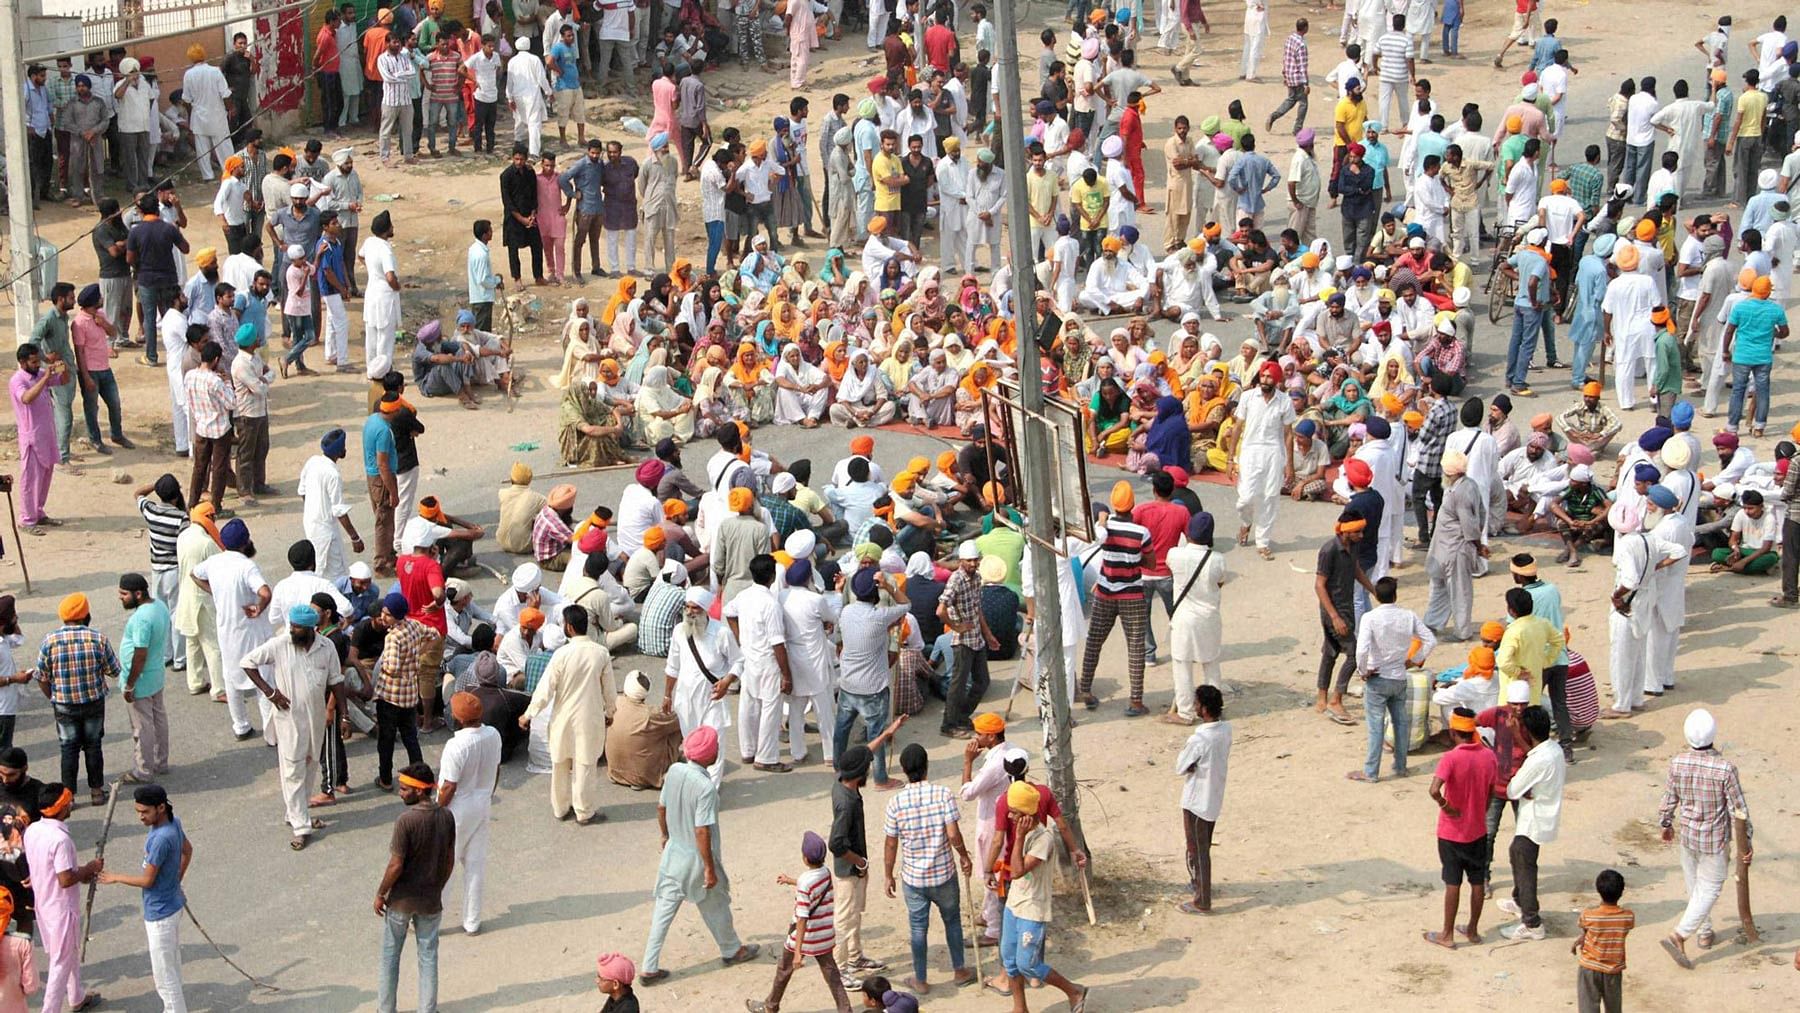 People gathered in Bathinda, Punjab to protest against the desecration of the holy book. (Photo: PTI)